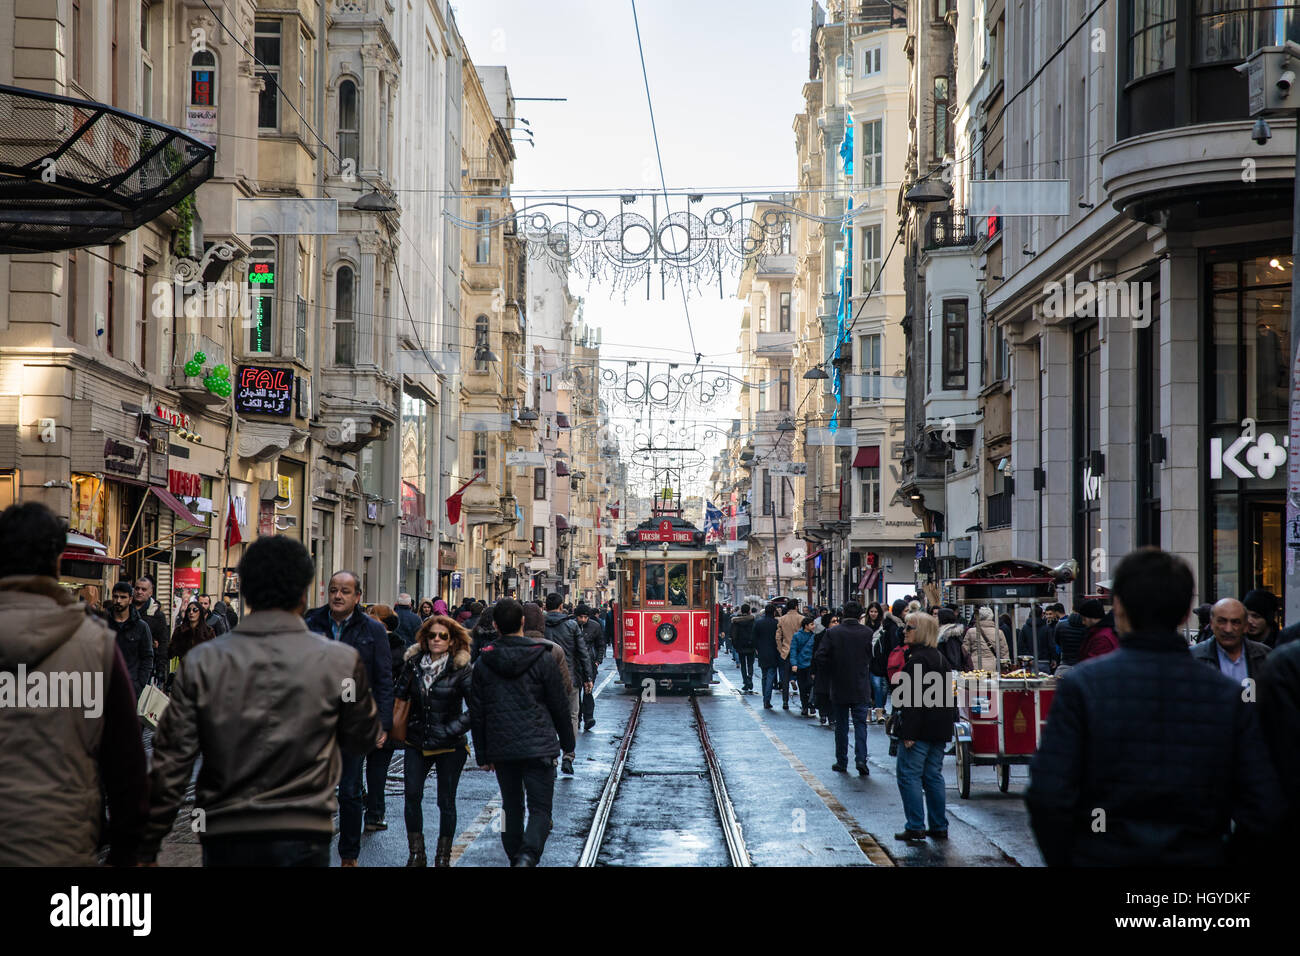 The iconic red tram on Istiklal in Istanbul, Turkey. Stock Photo